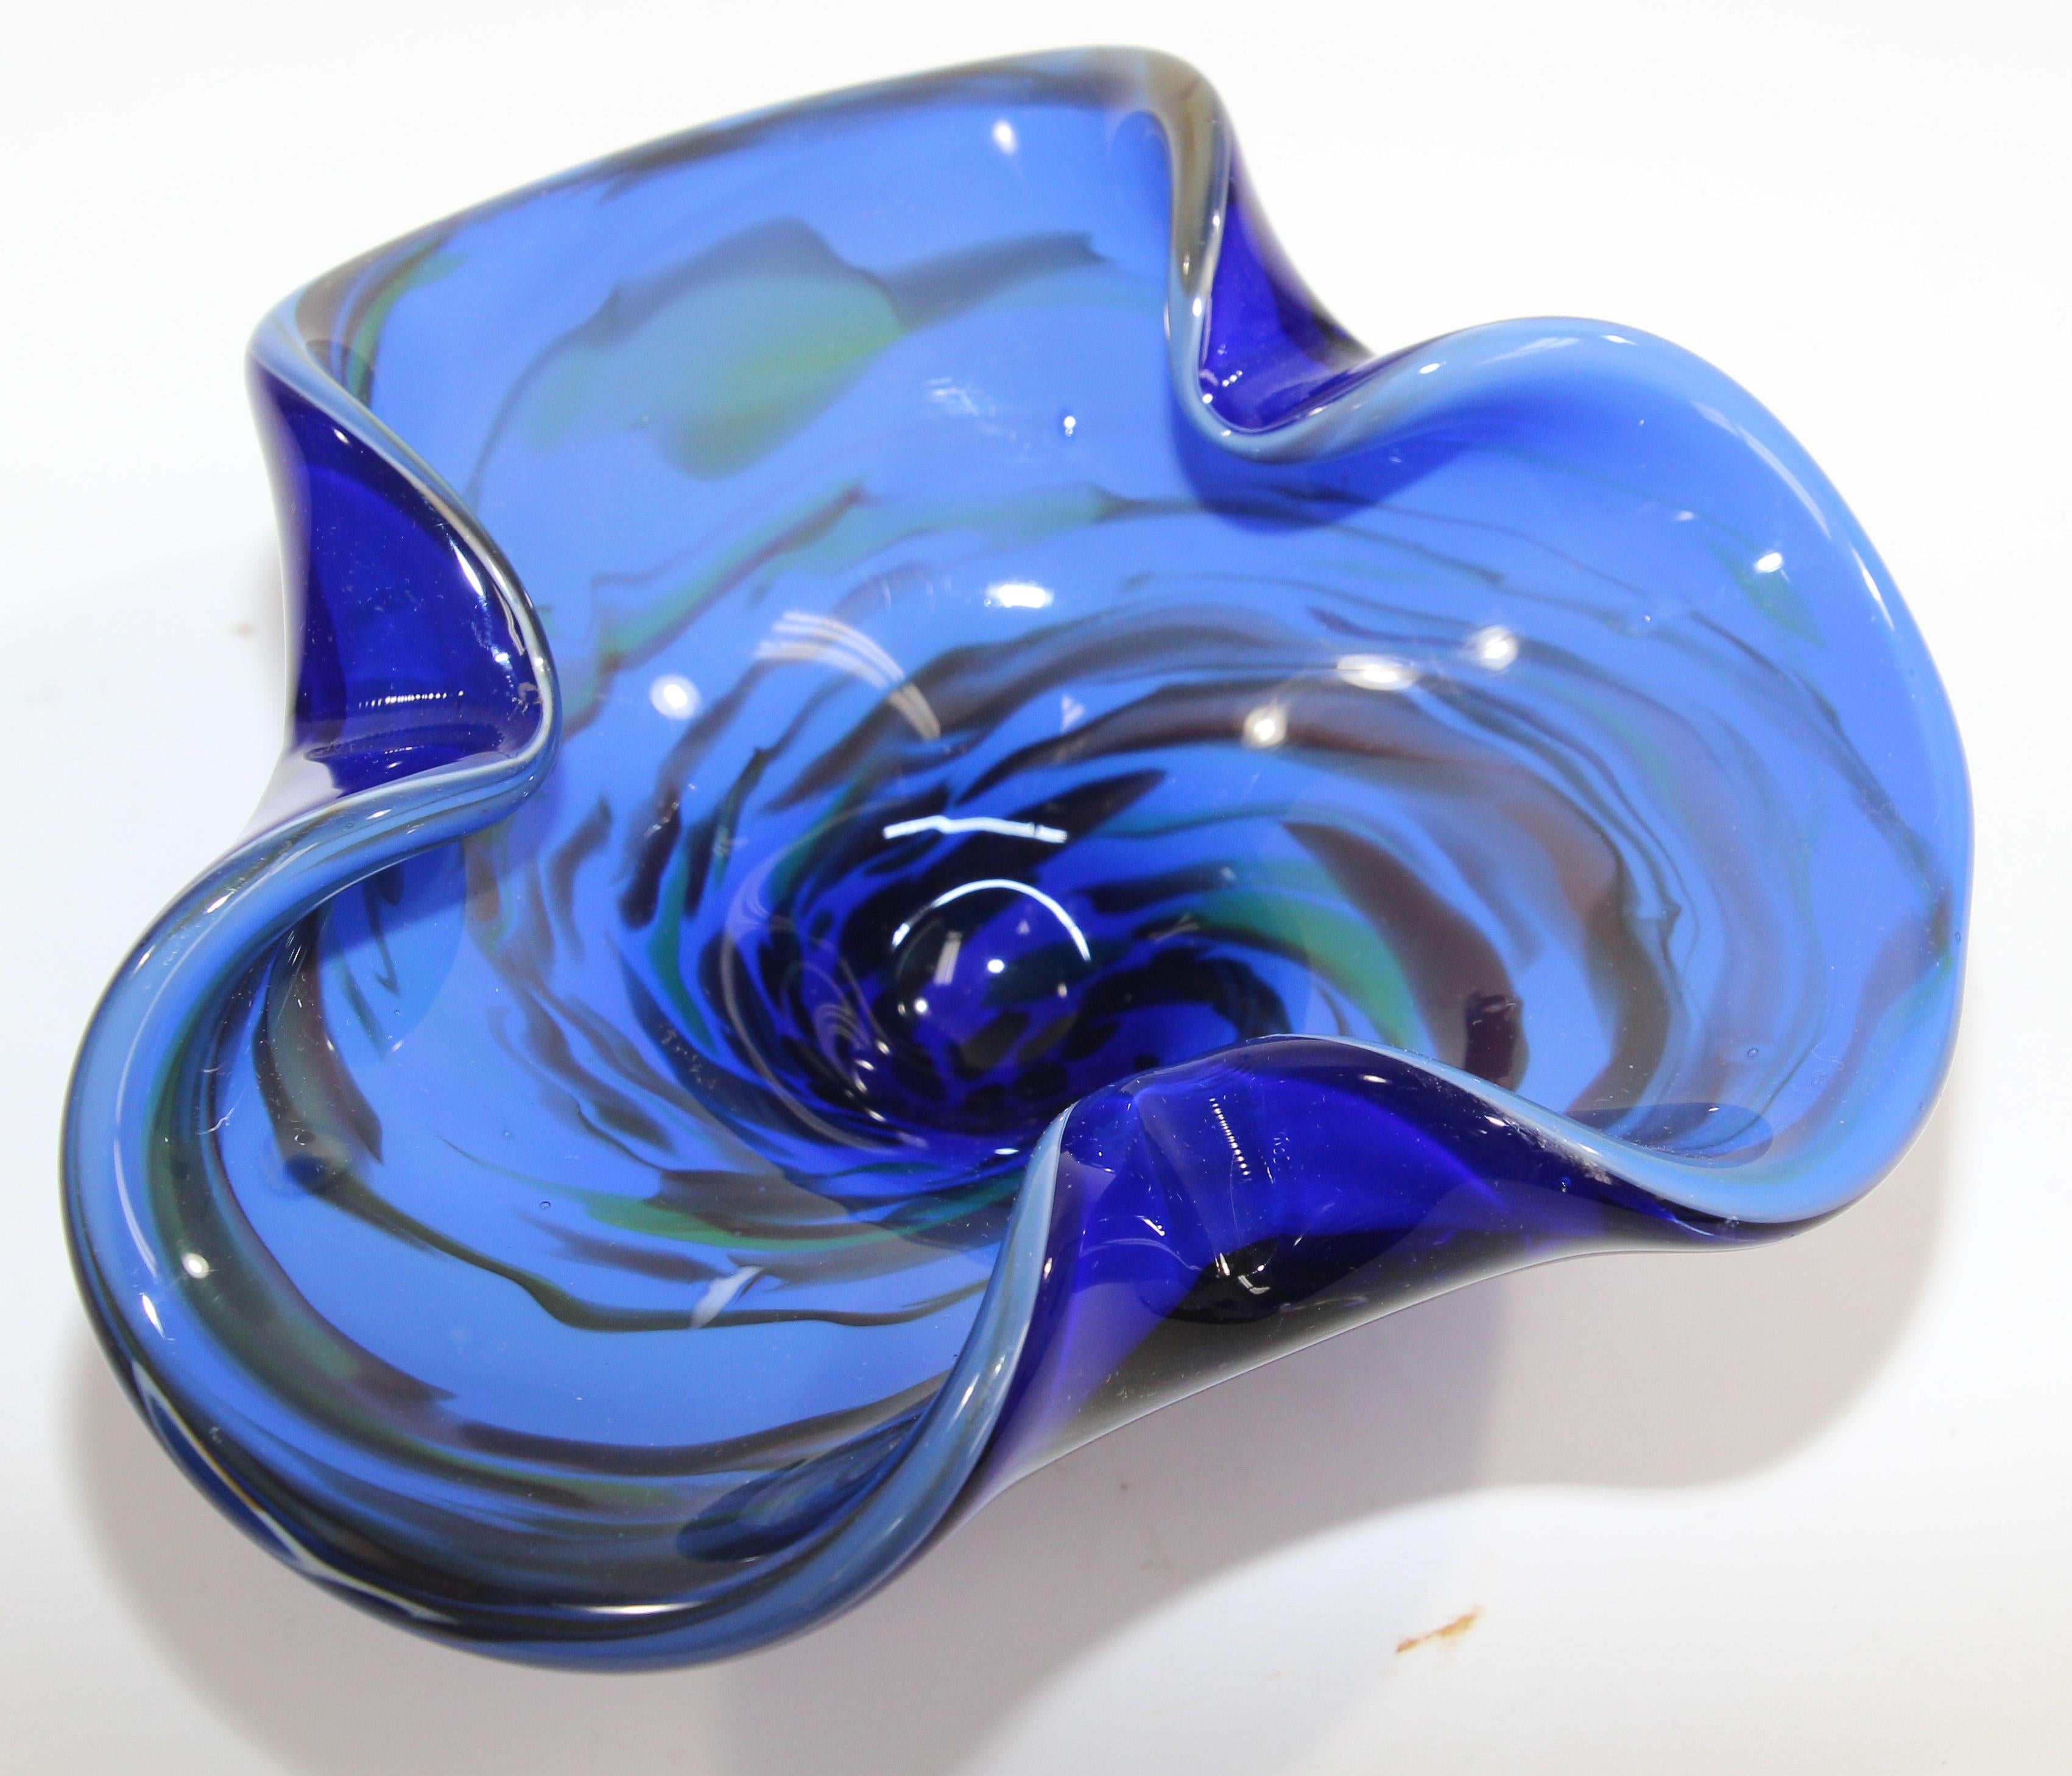 Vintage Murano Venetian Handblown Art Glass Cobalt Blue Ashtray In Good Condition For Sale In North Hollywood, CA